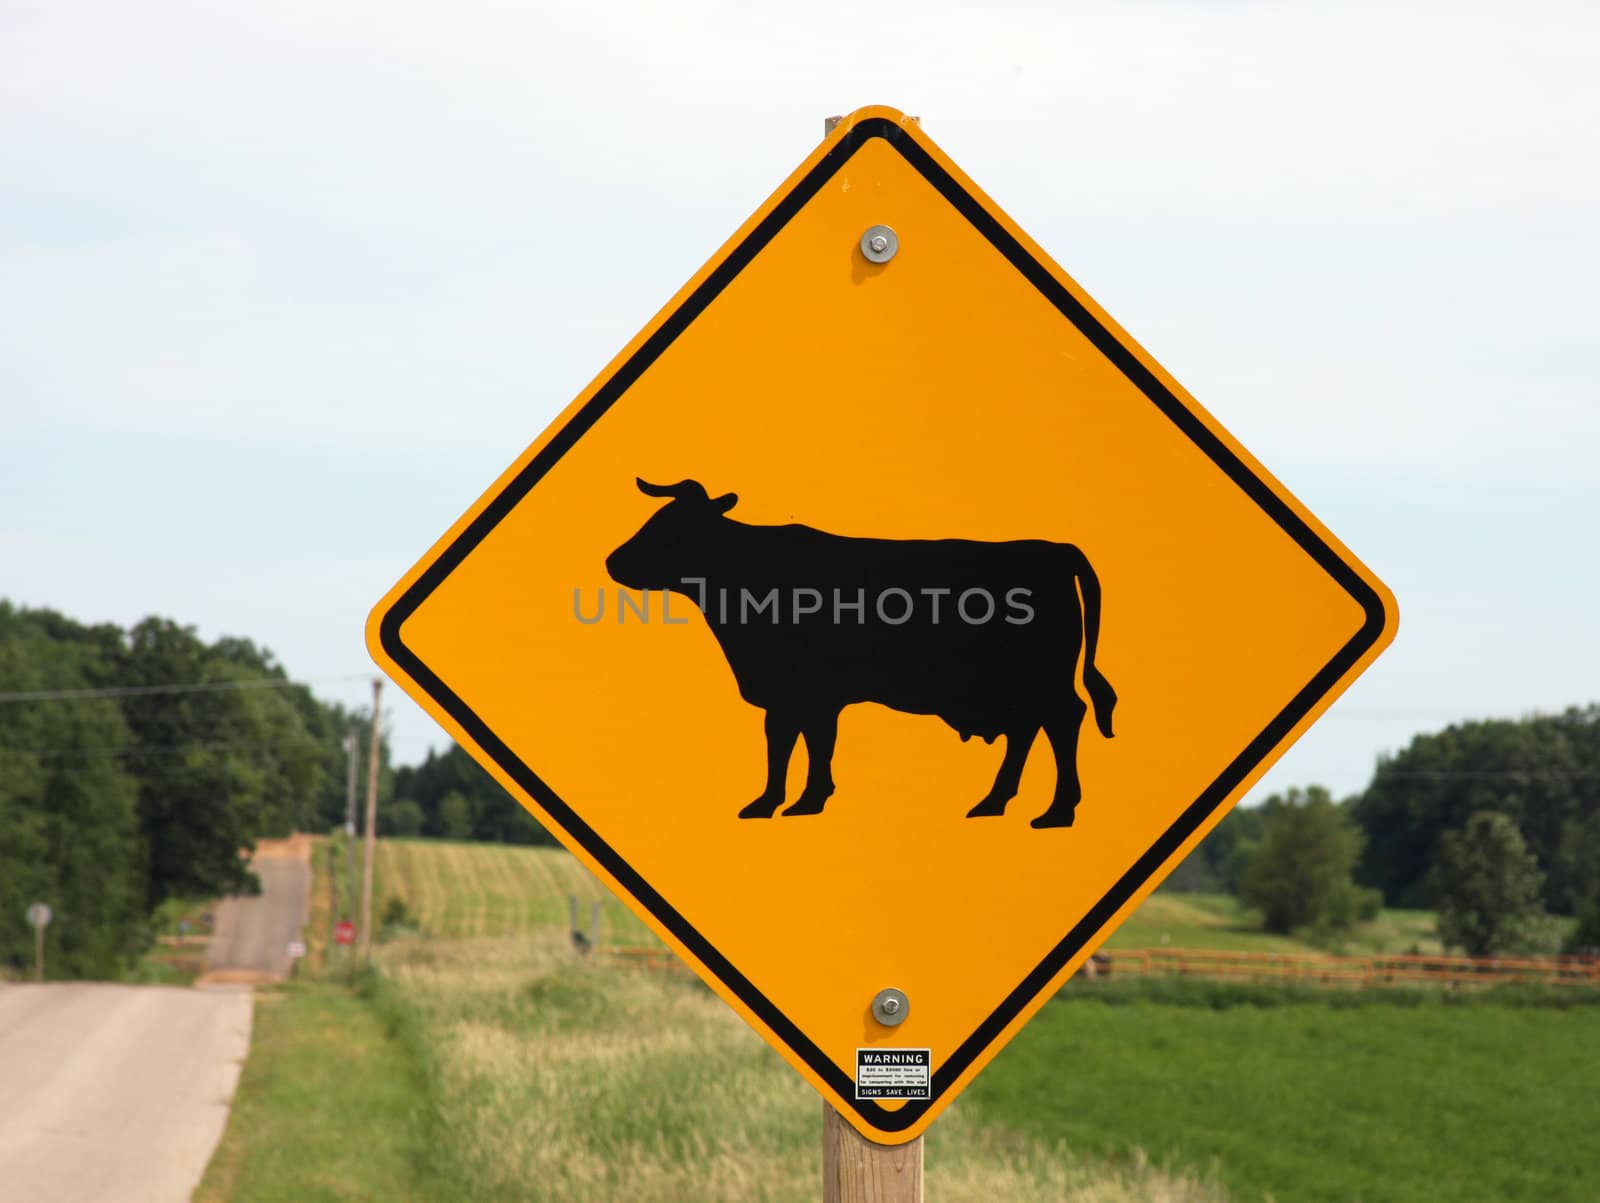 Cattle crossing warning sign by dcwcreations